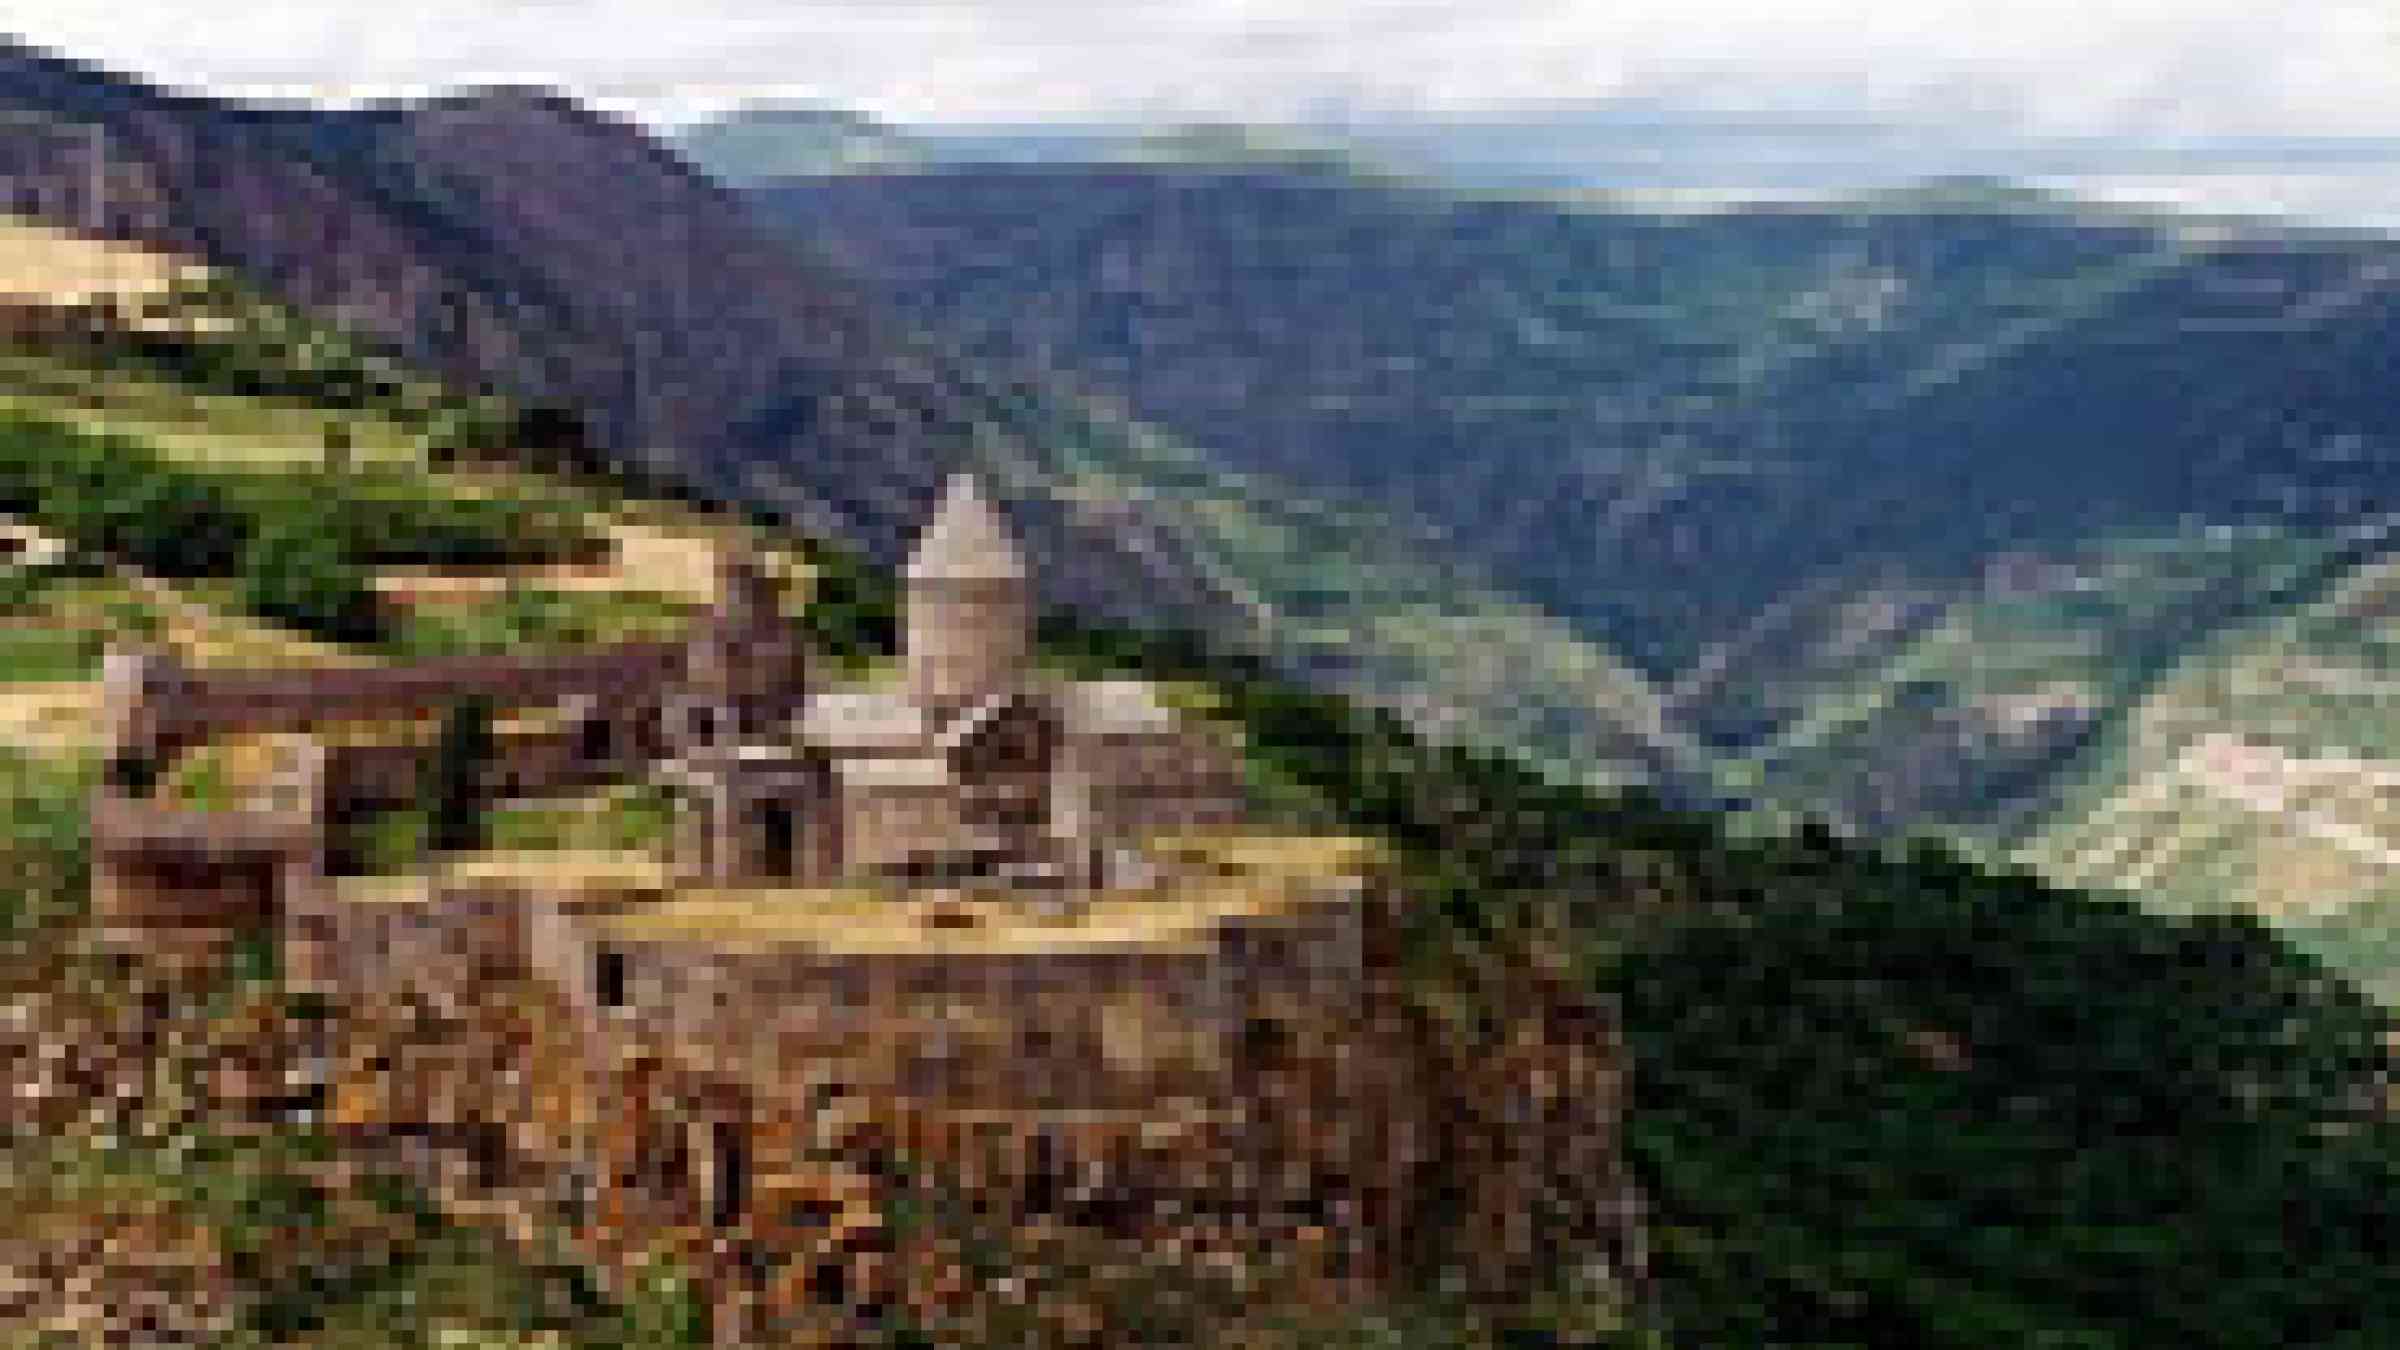 photo of Tatev Monastery, Armenia, by flicker user Tommy and Georgie, Creative Commons Attribution 2.0 Generic, http://www.flickr.com/photos/thomasfrederick/2184913934